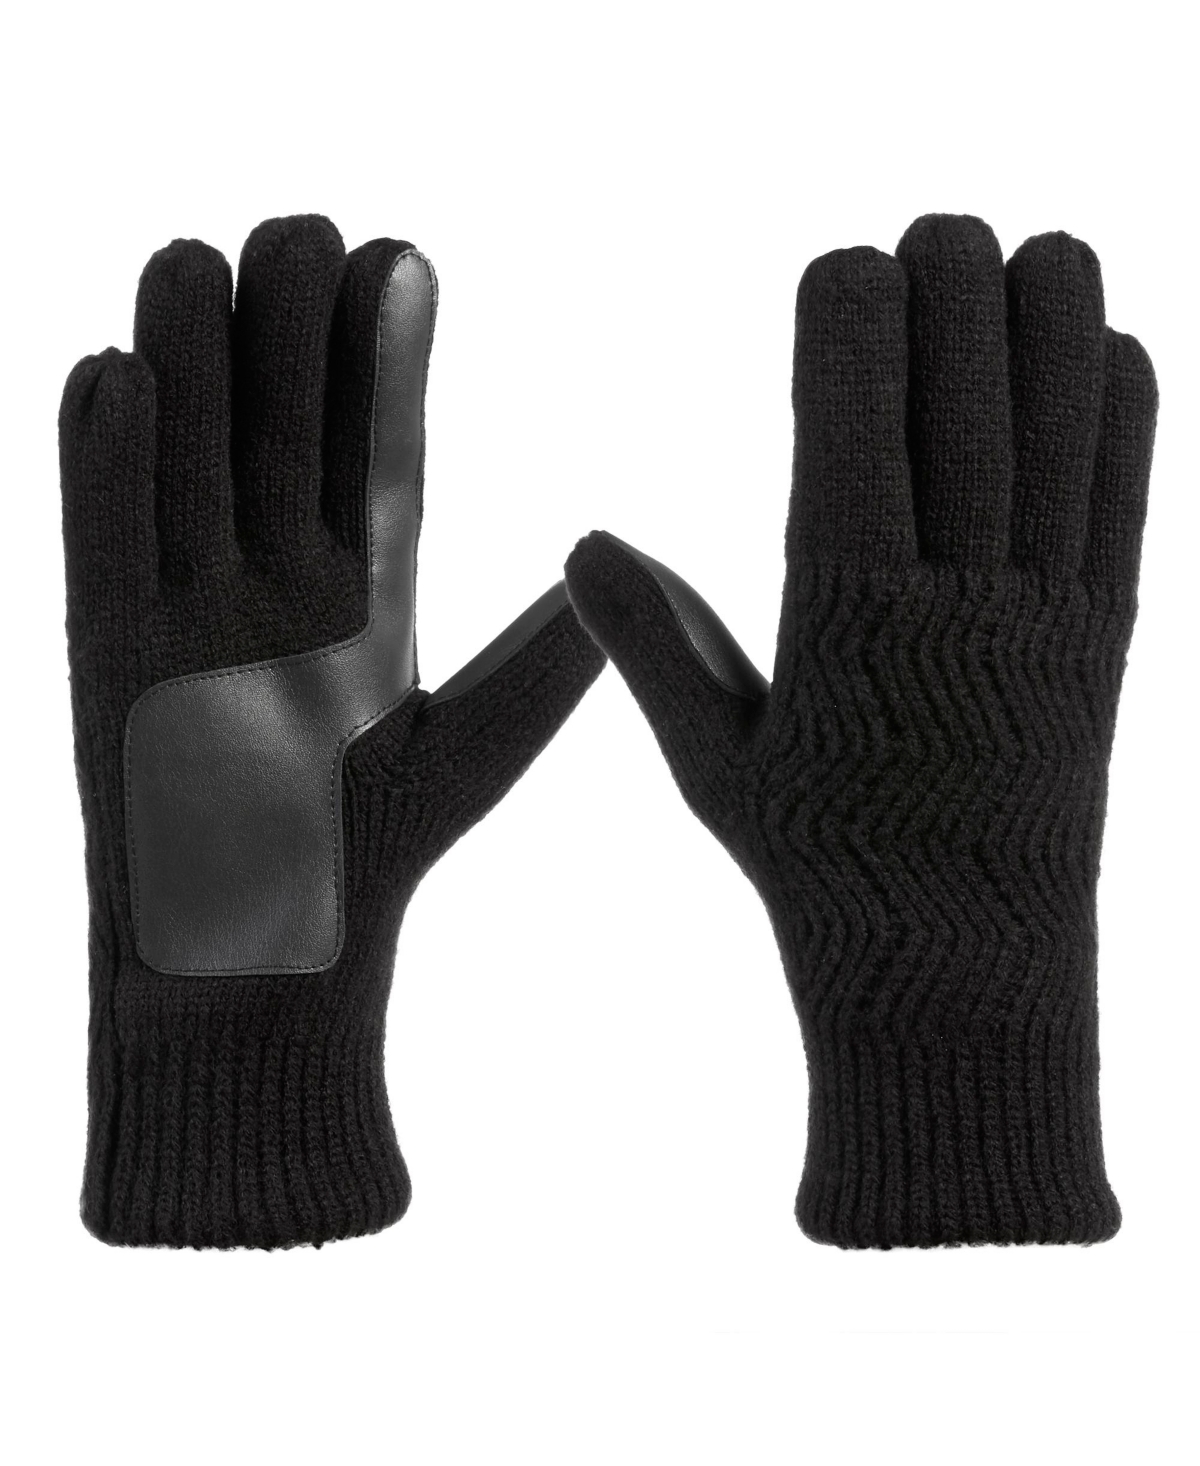 Men's Lined Water Repellent Chevron Knit Touchscreen Gloves - Olive